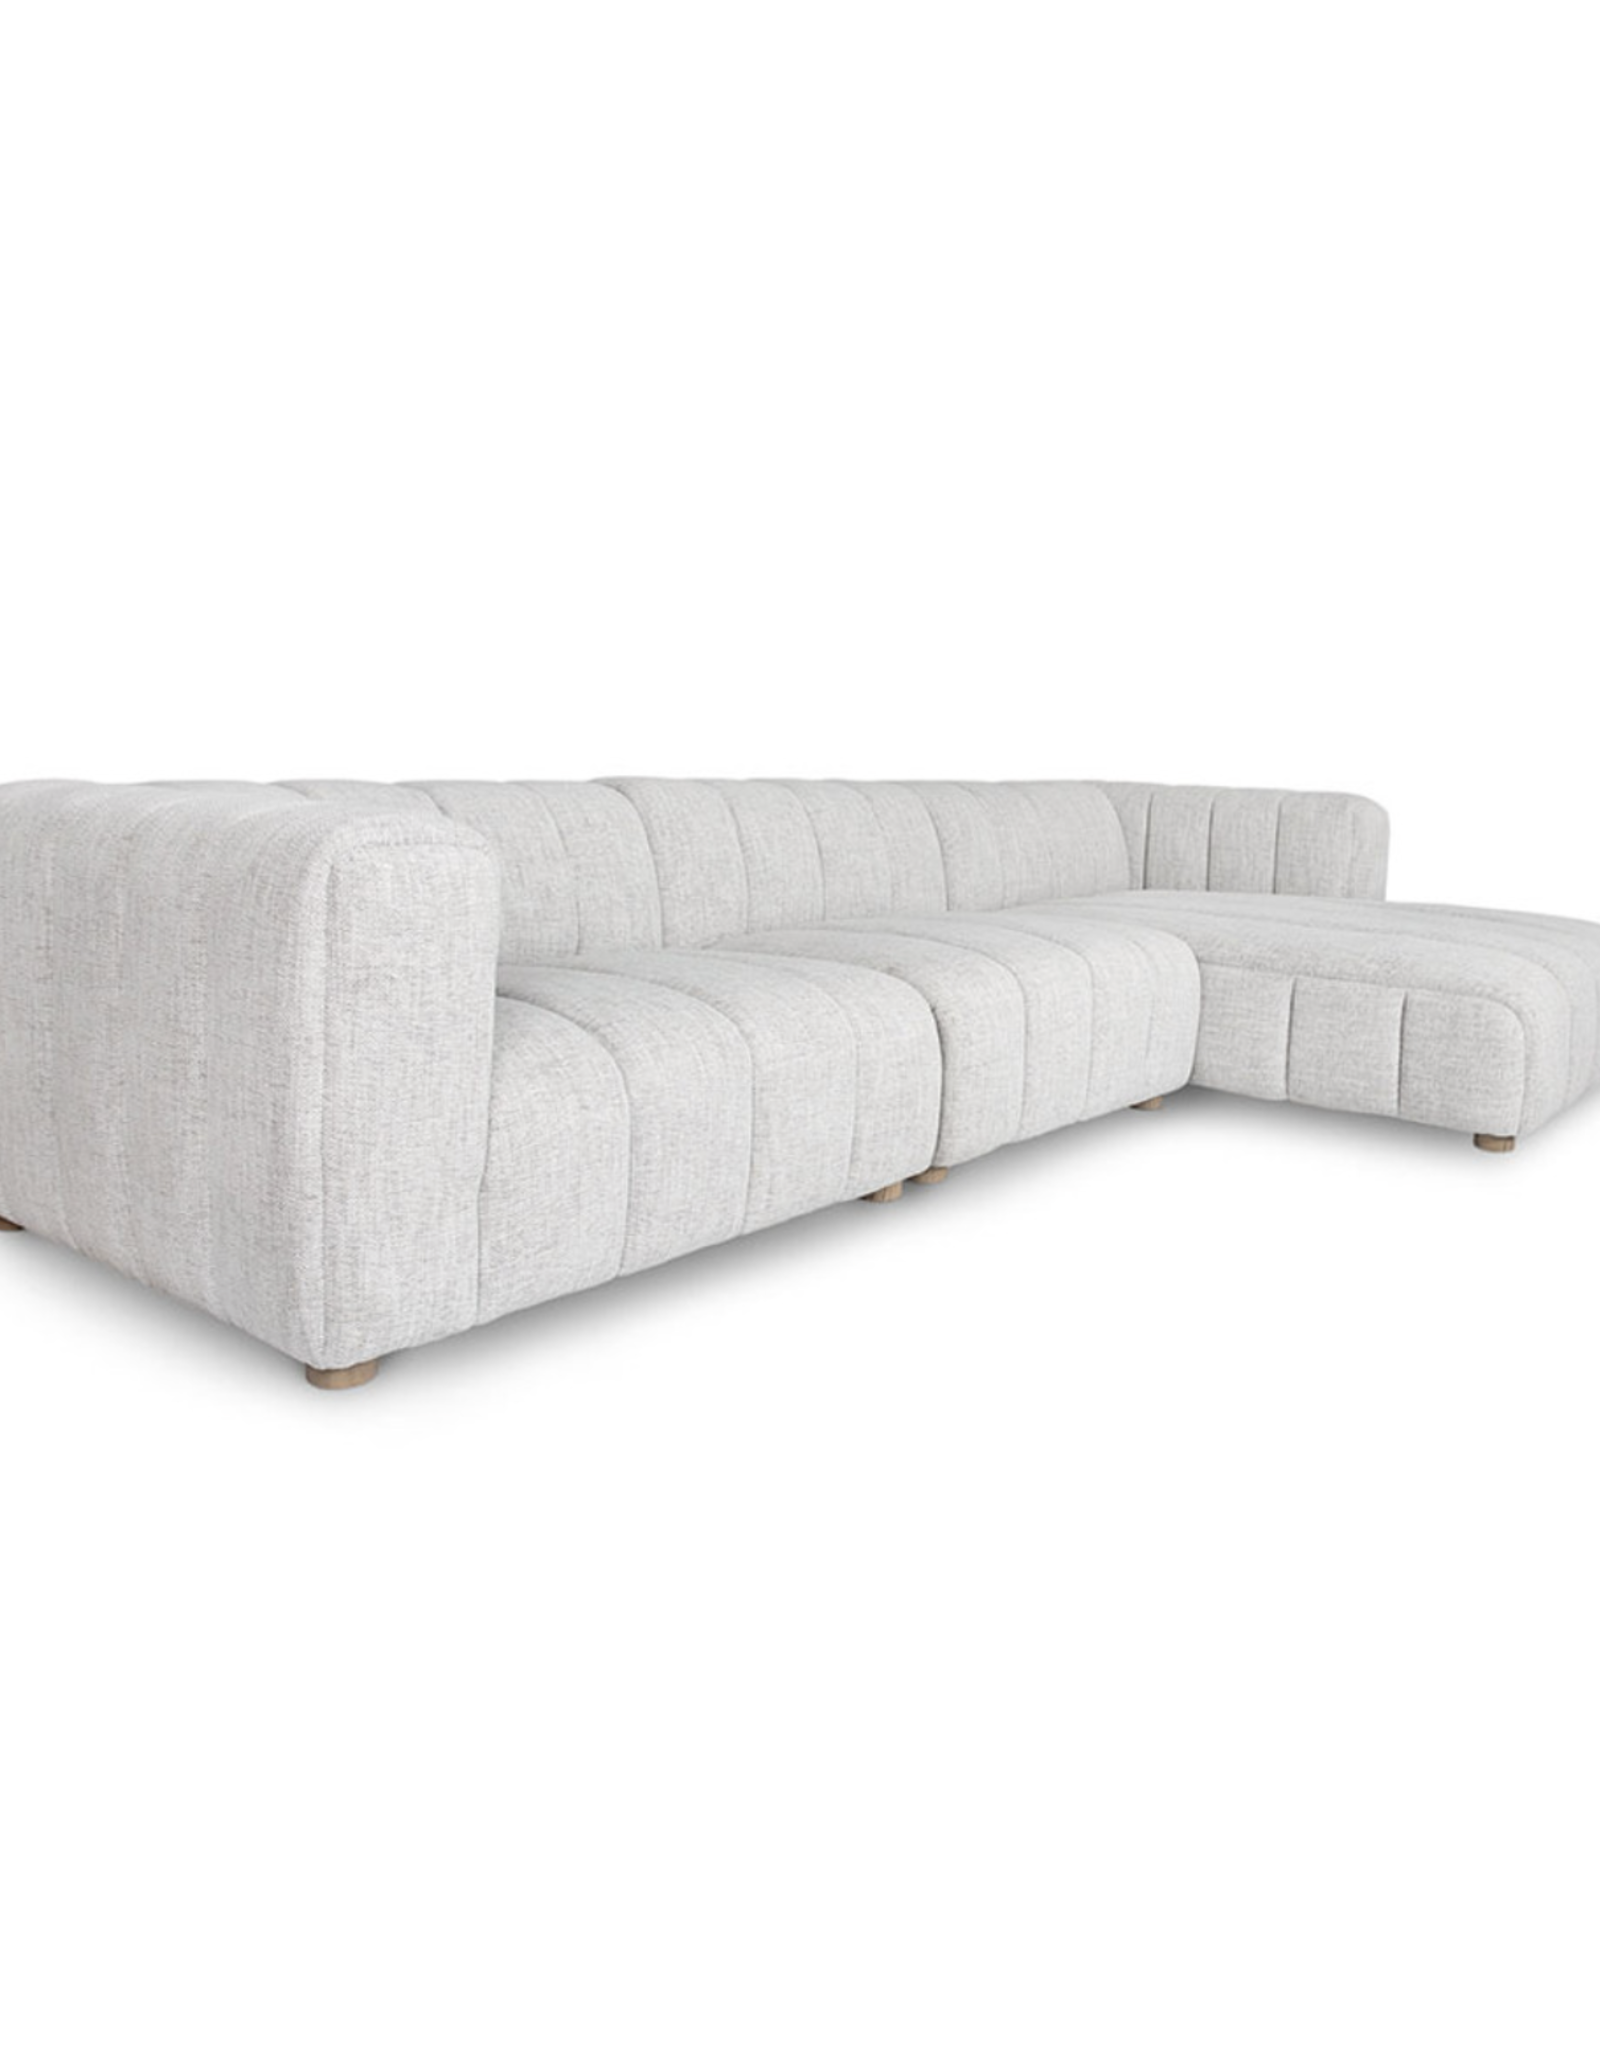 Envy 3 pc Sectional - RAF Chaise in Coconut